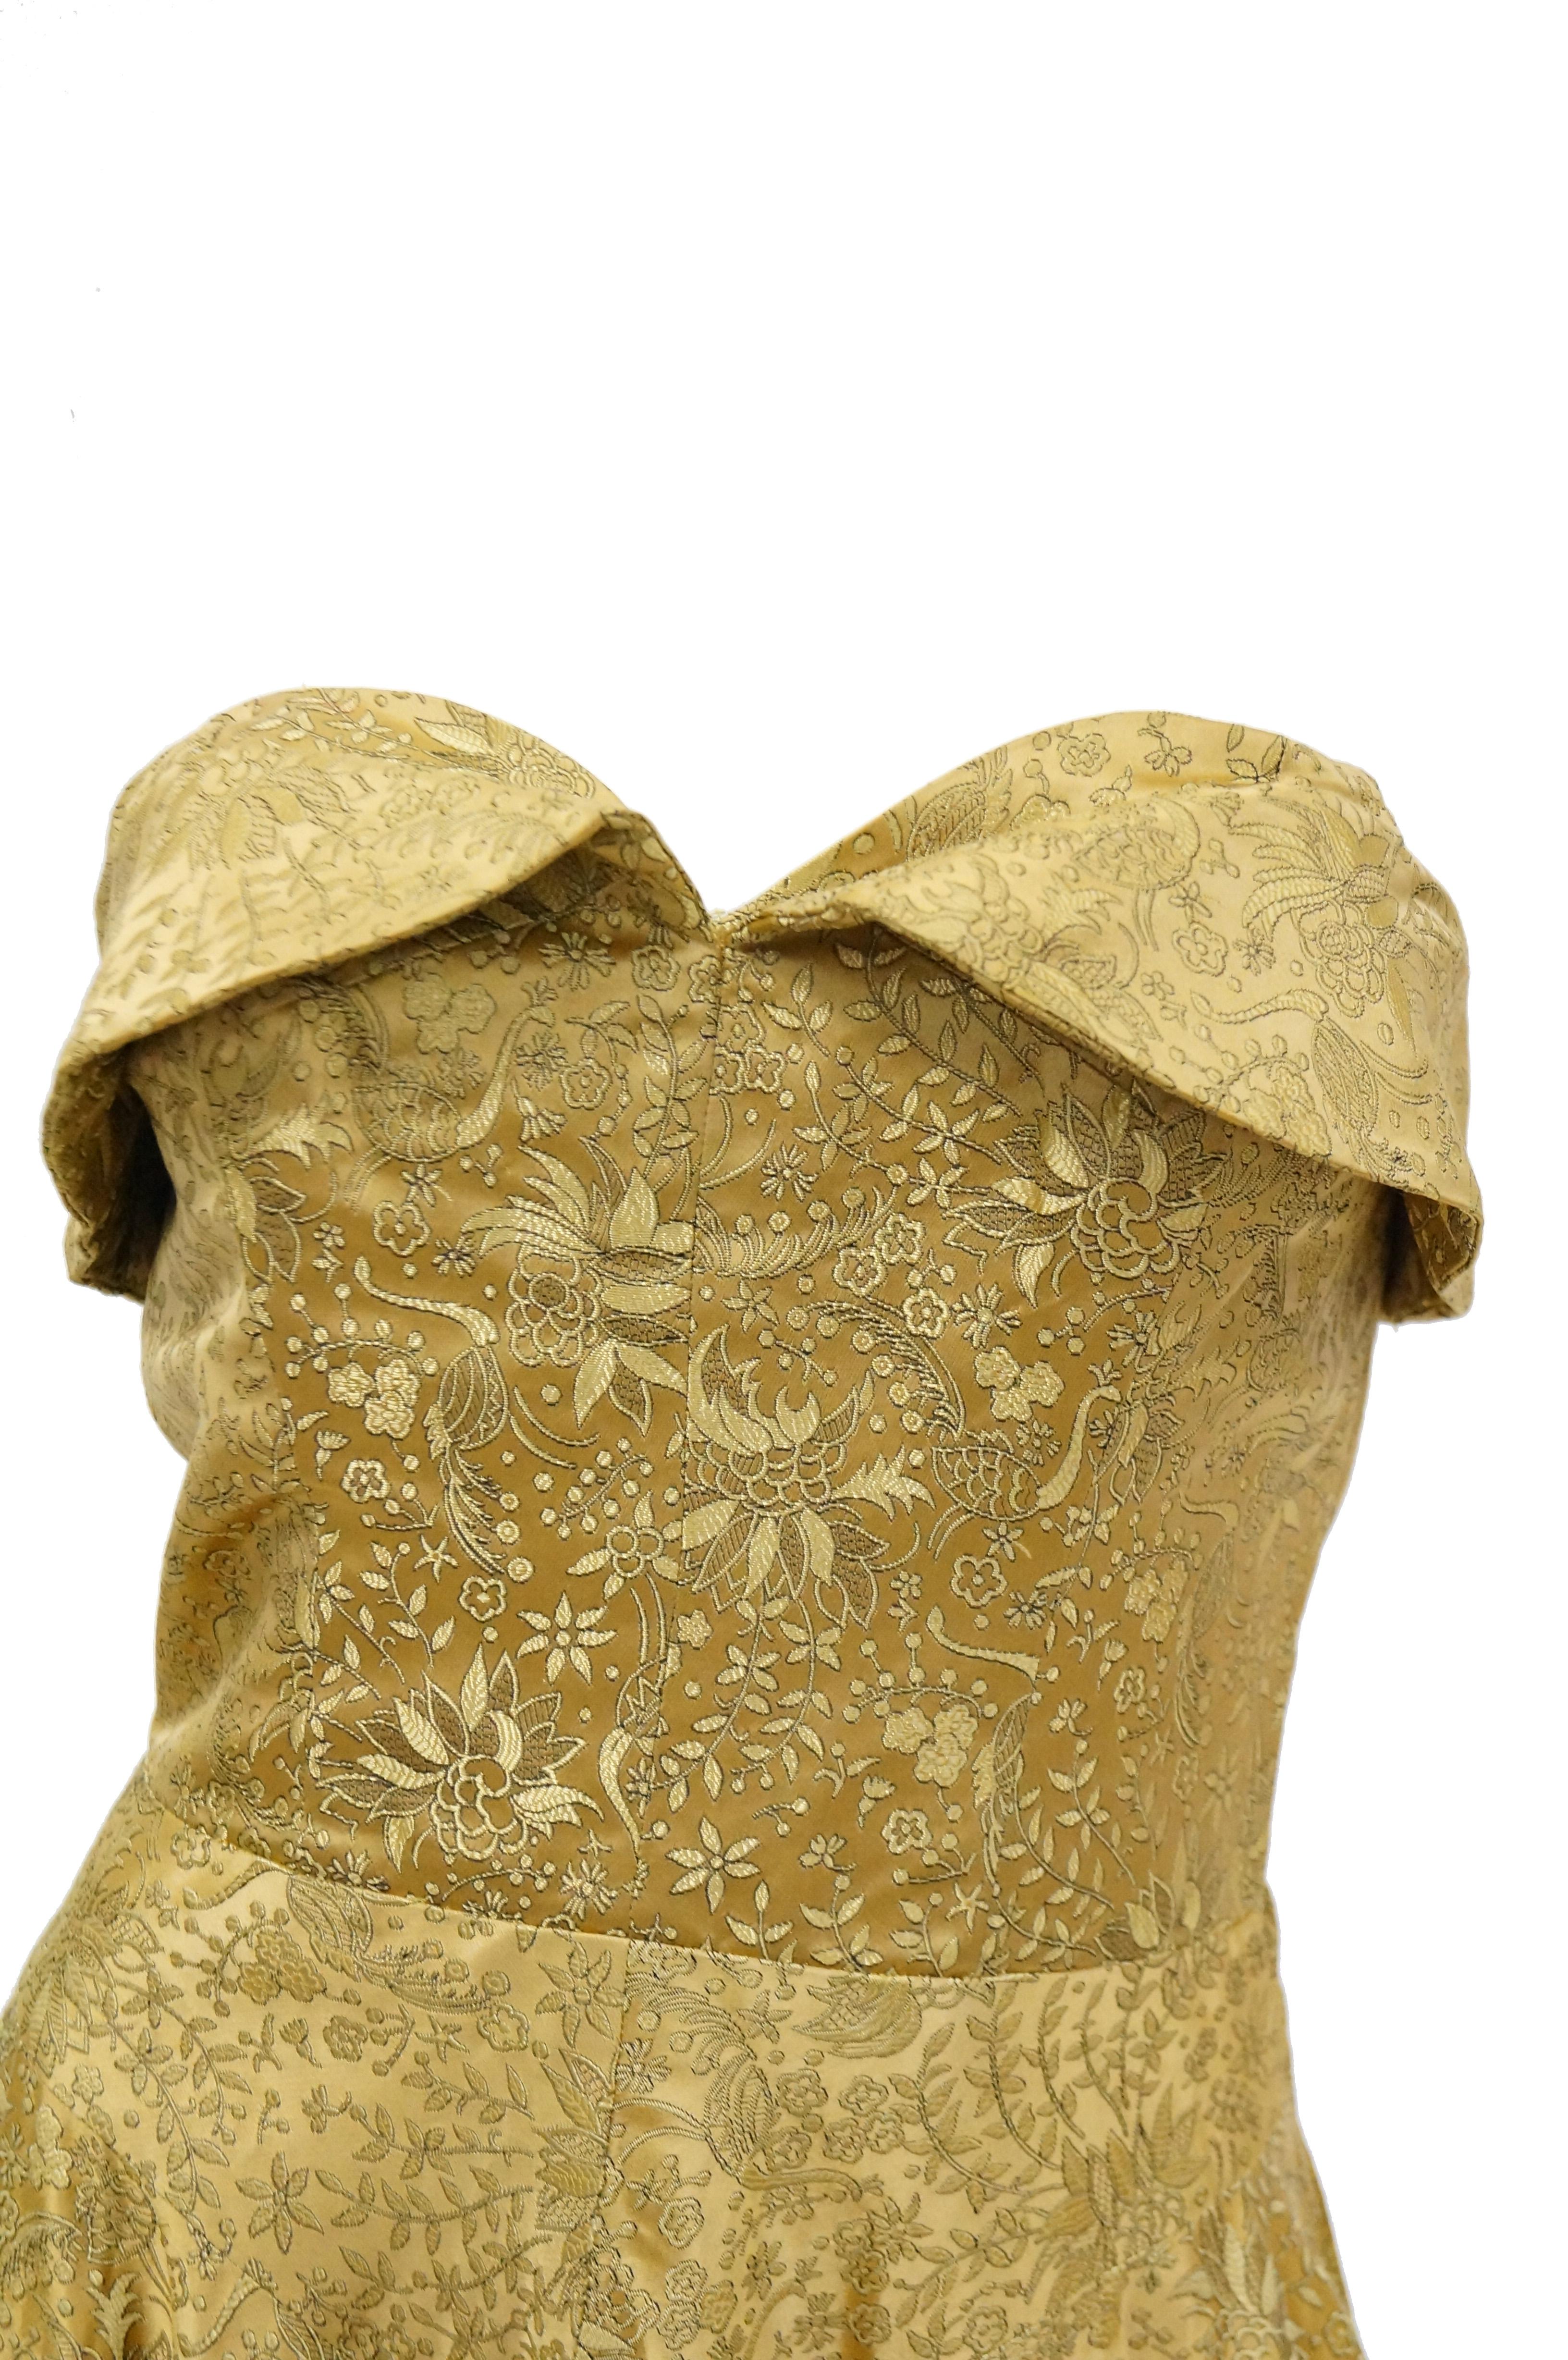 Glorious gold floral brocade evening dress in Christian Dior's 